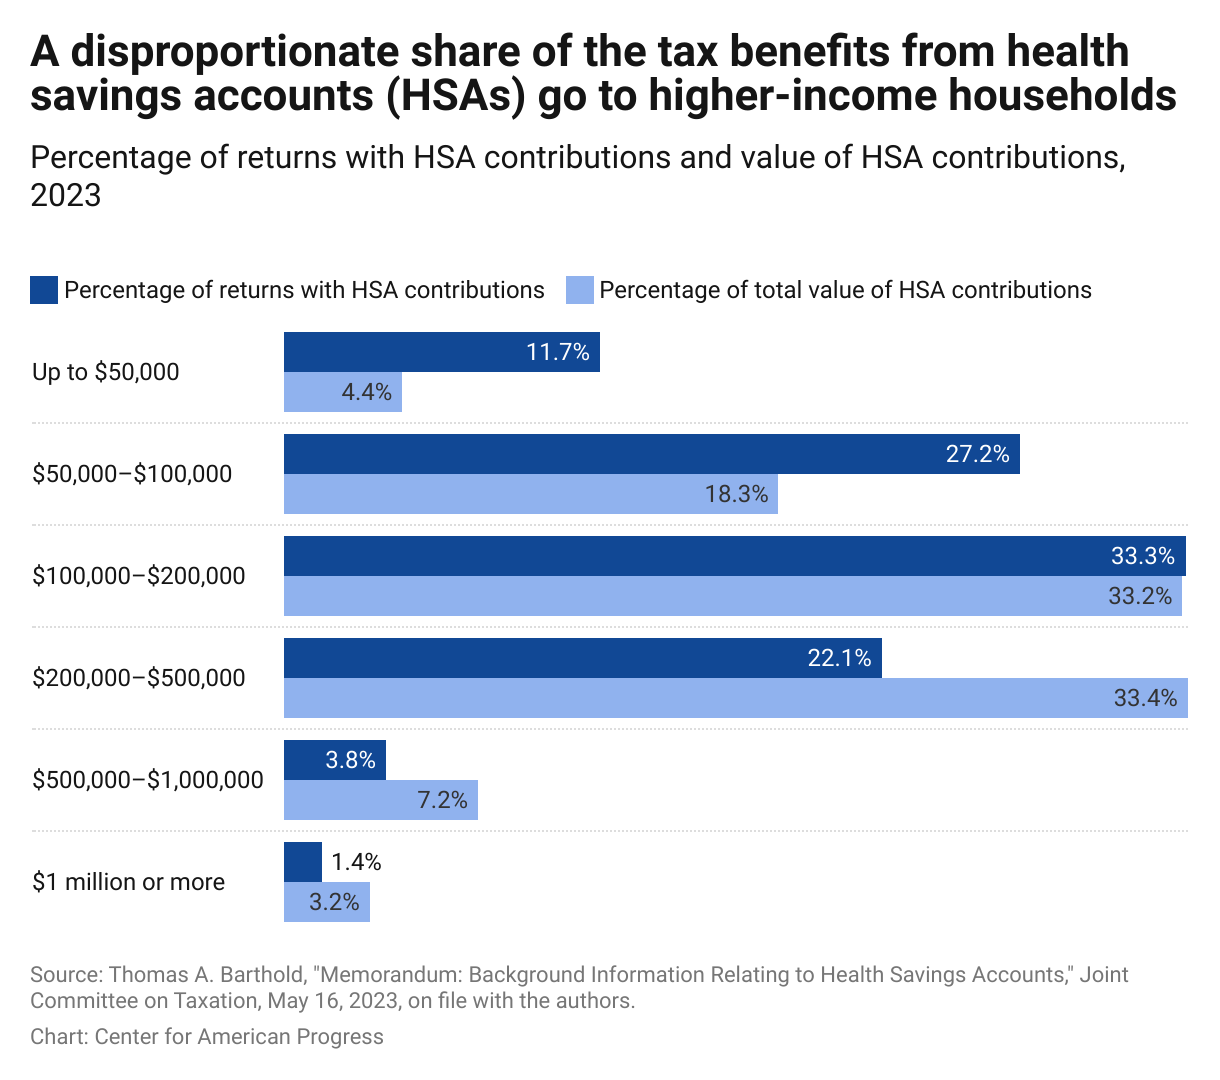 Bar chart with the percentage of households with HSA contributions and the percentage of the total value of those contributions by income level, showing that high-income households disproportionately benefited from HSA tax deductions in 2023. 